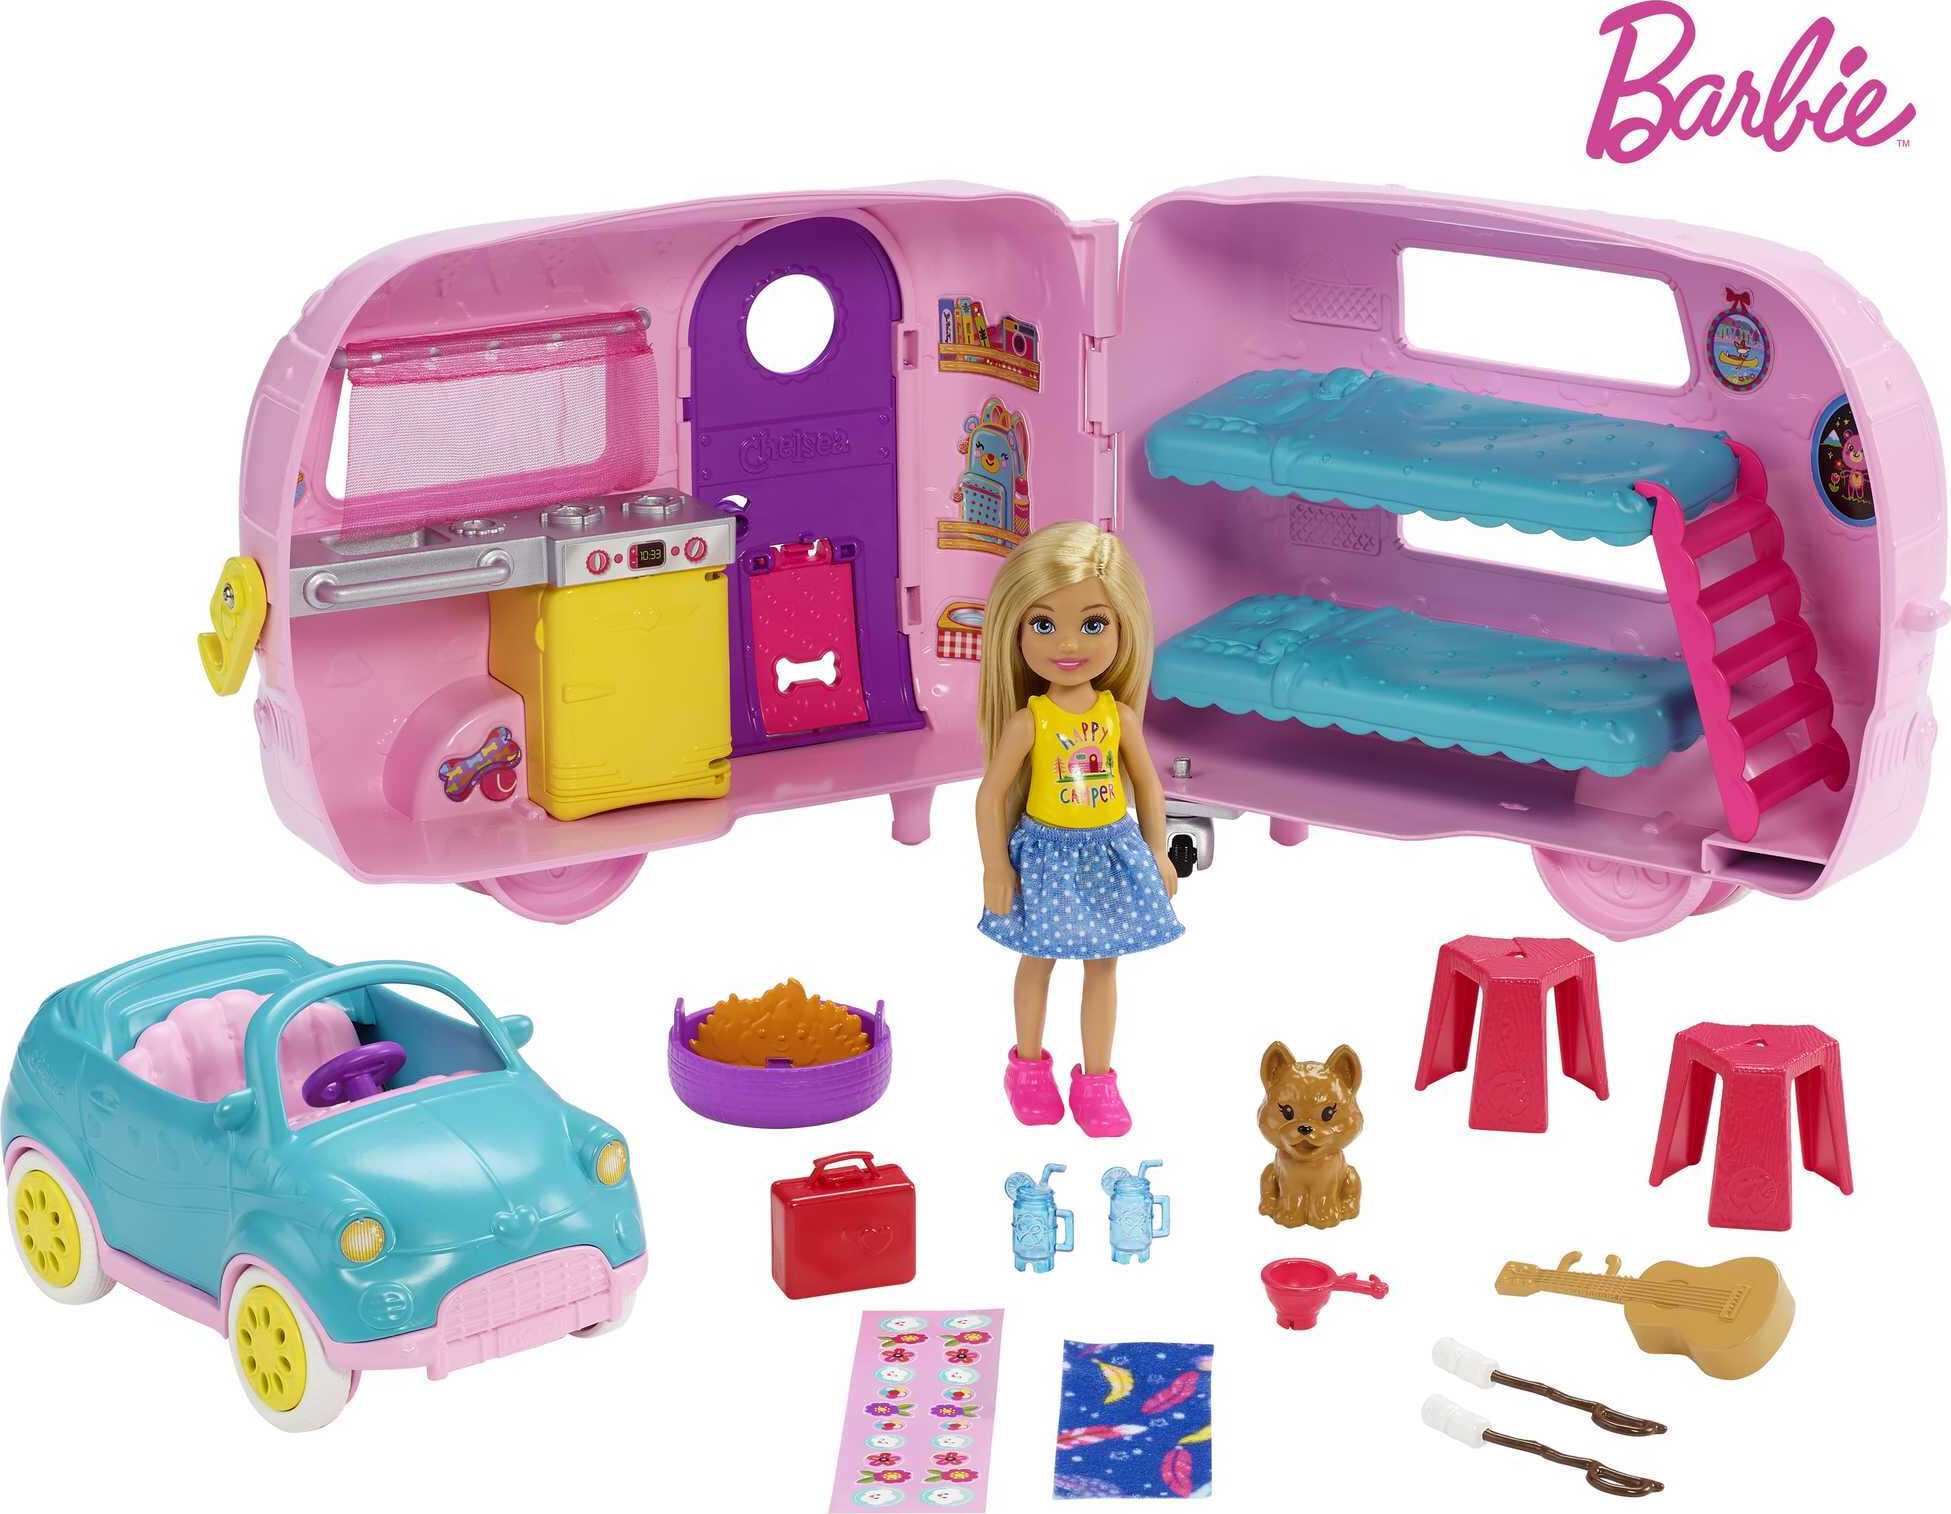 Barbie Doll My Scene Chelsea Style Room Playset Getting Ready Green Coffee Table 